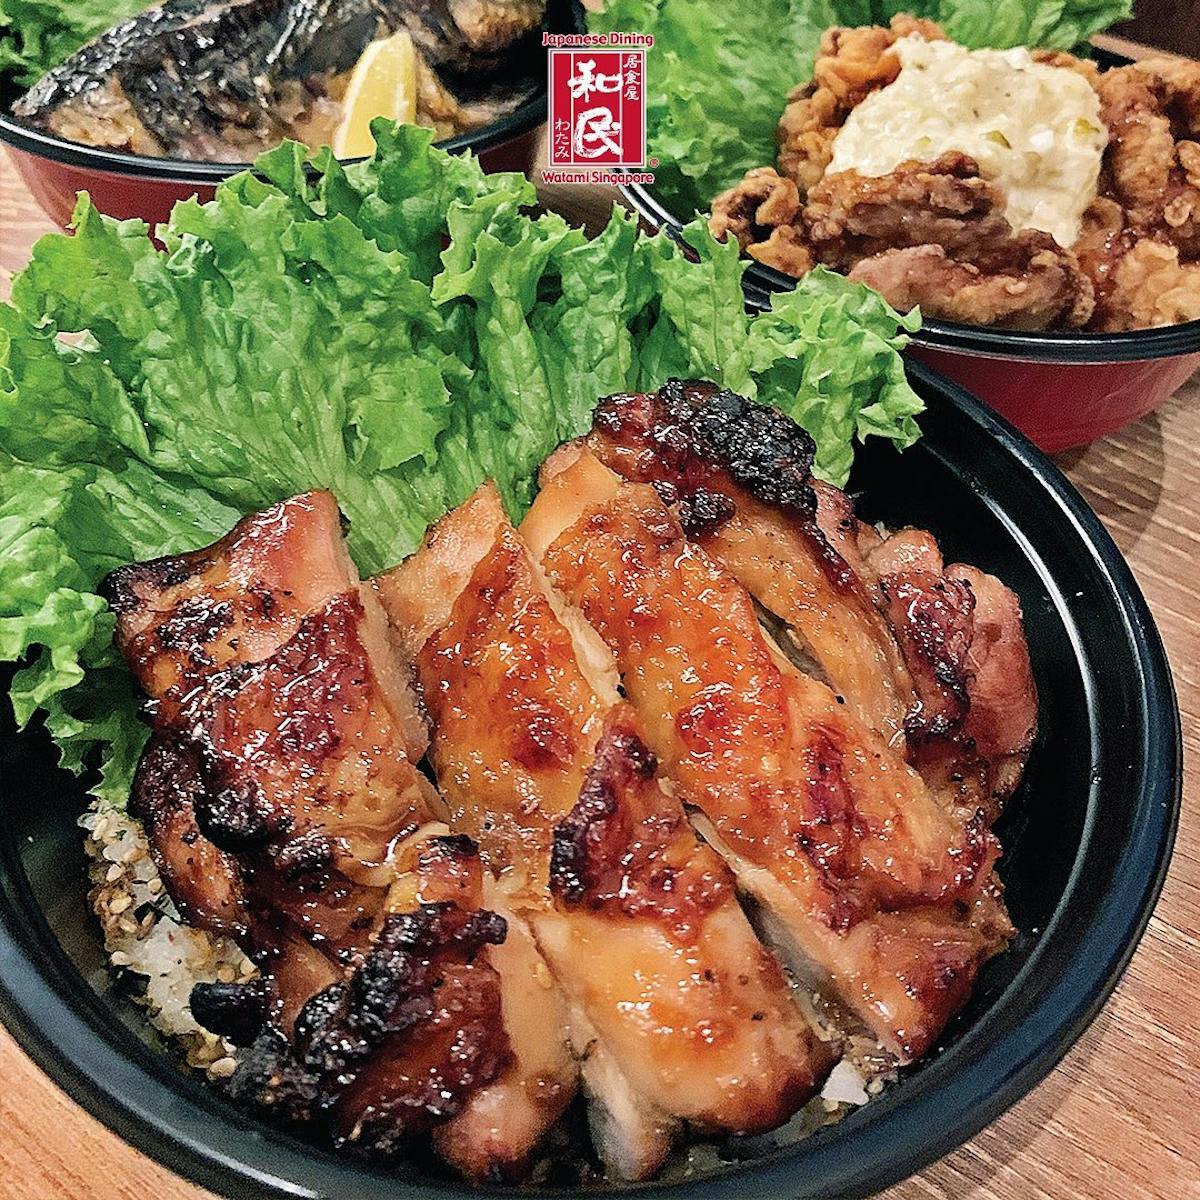 Watami Japanese Dining Student Meal Specials from $8.90 Deal